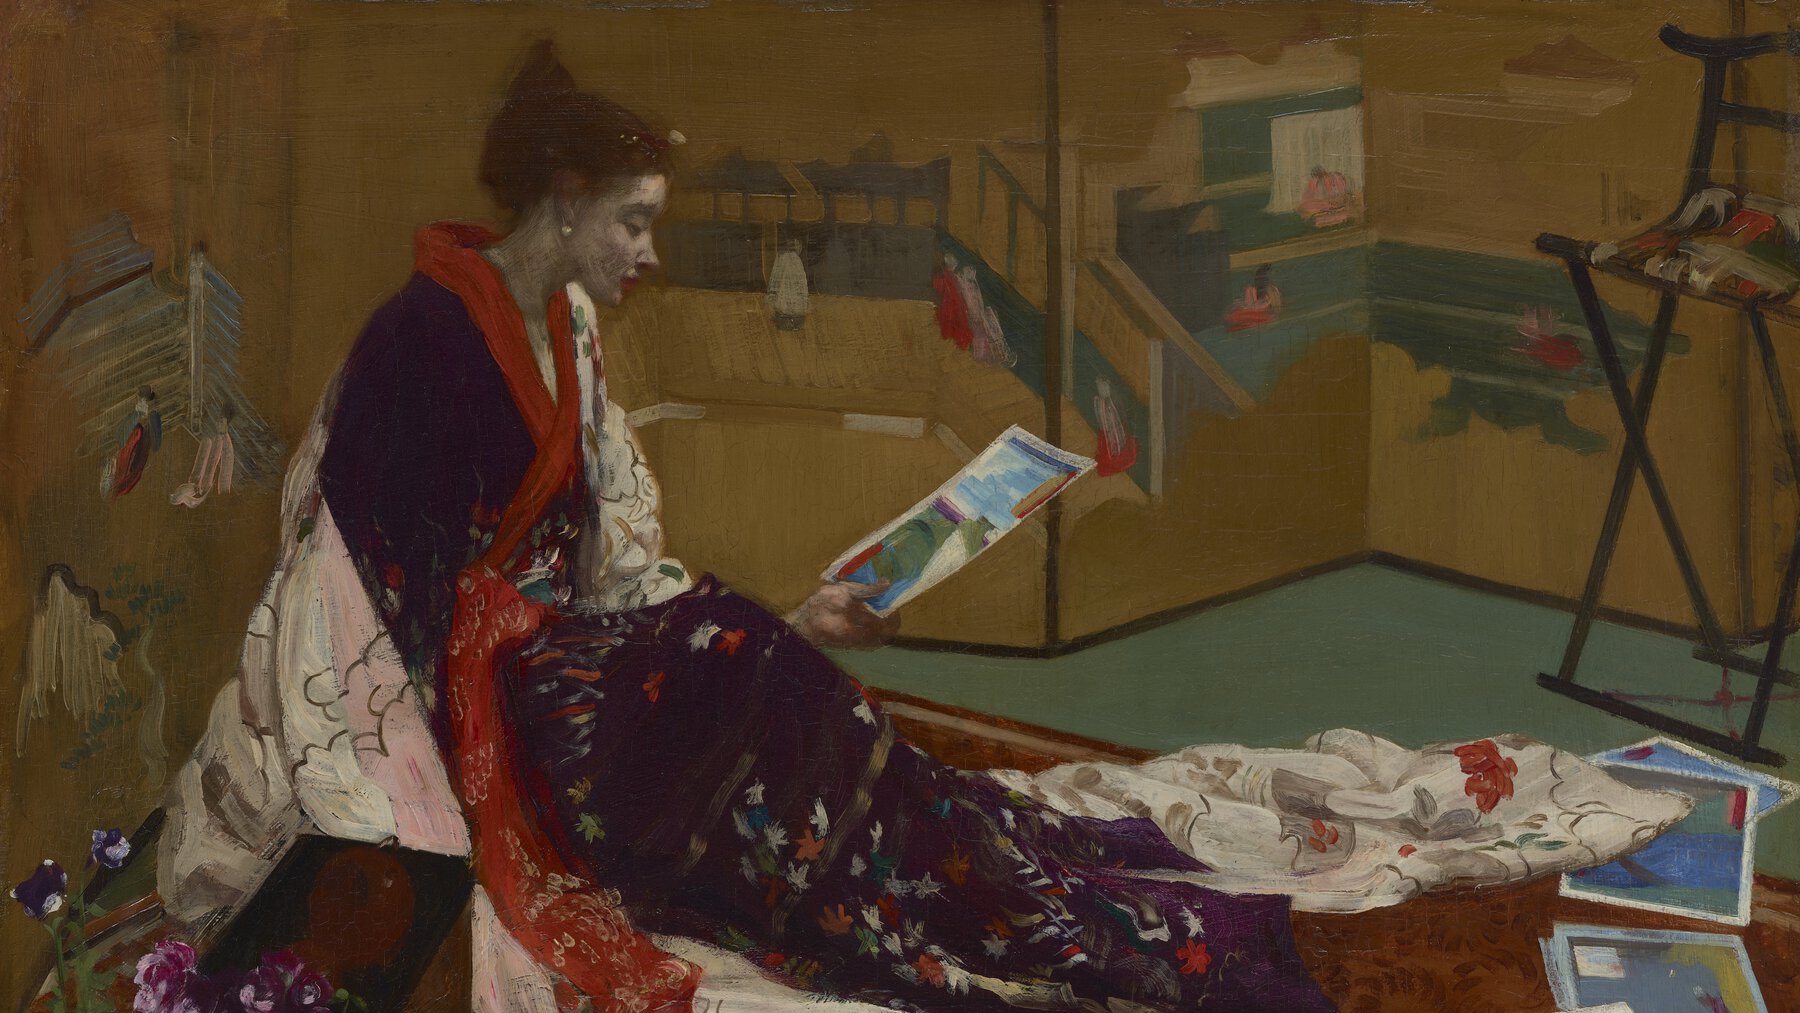 Caprice in traditional Japansese dress, seated and examining one of several illustrations, with gold screen in background.